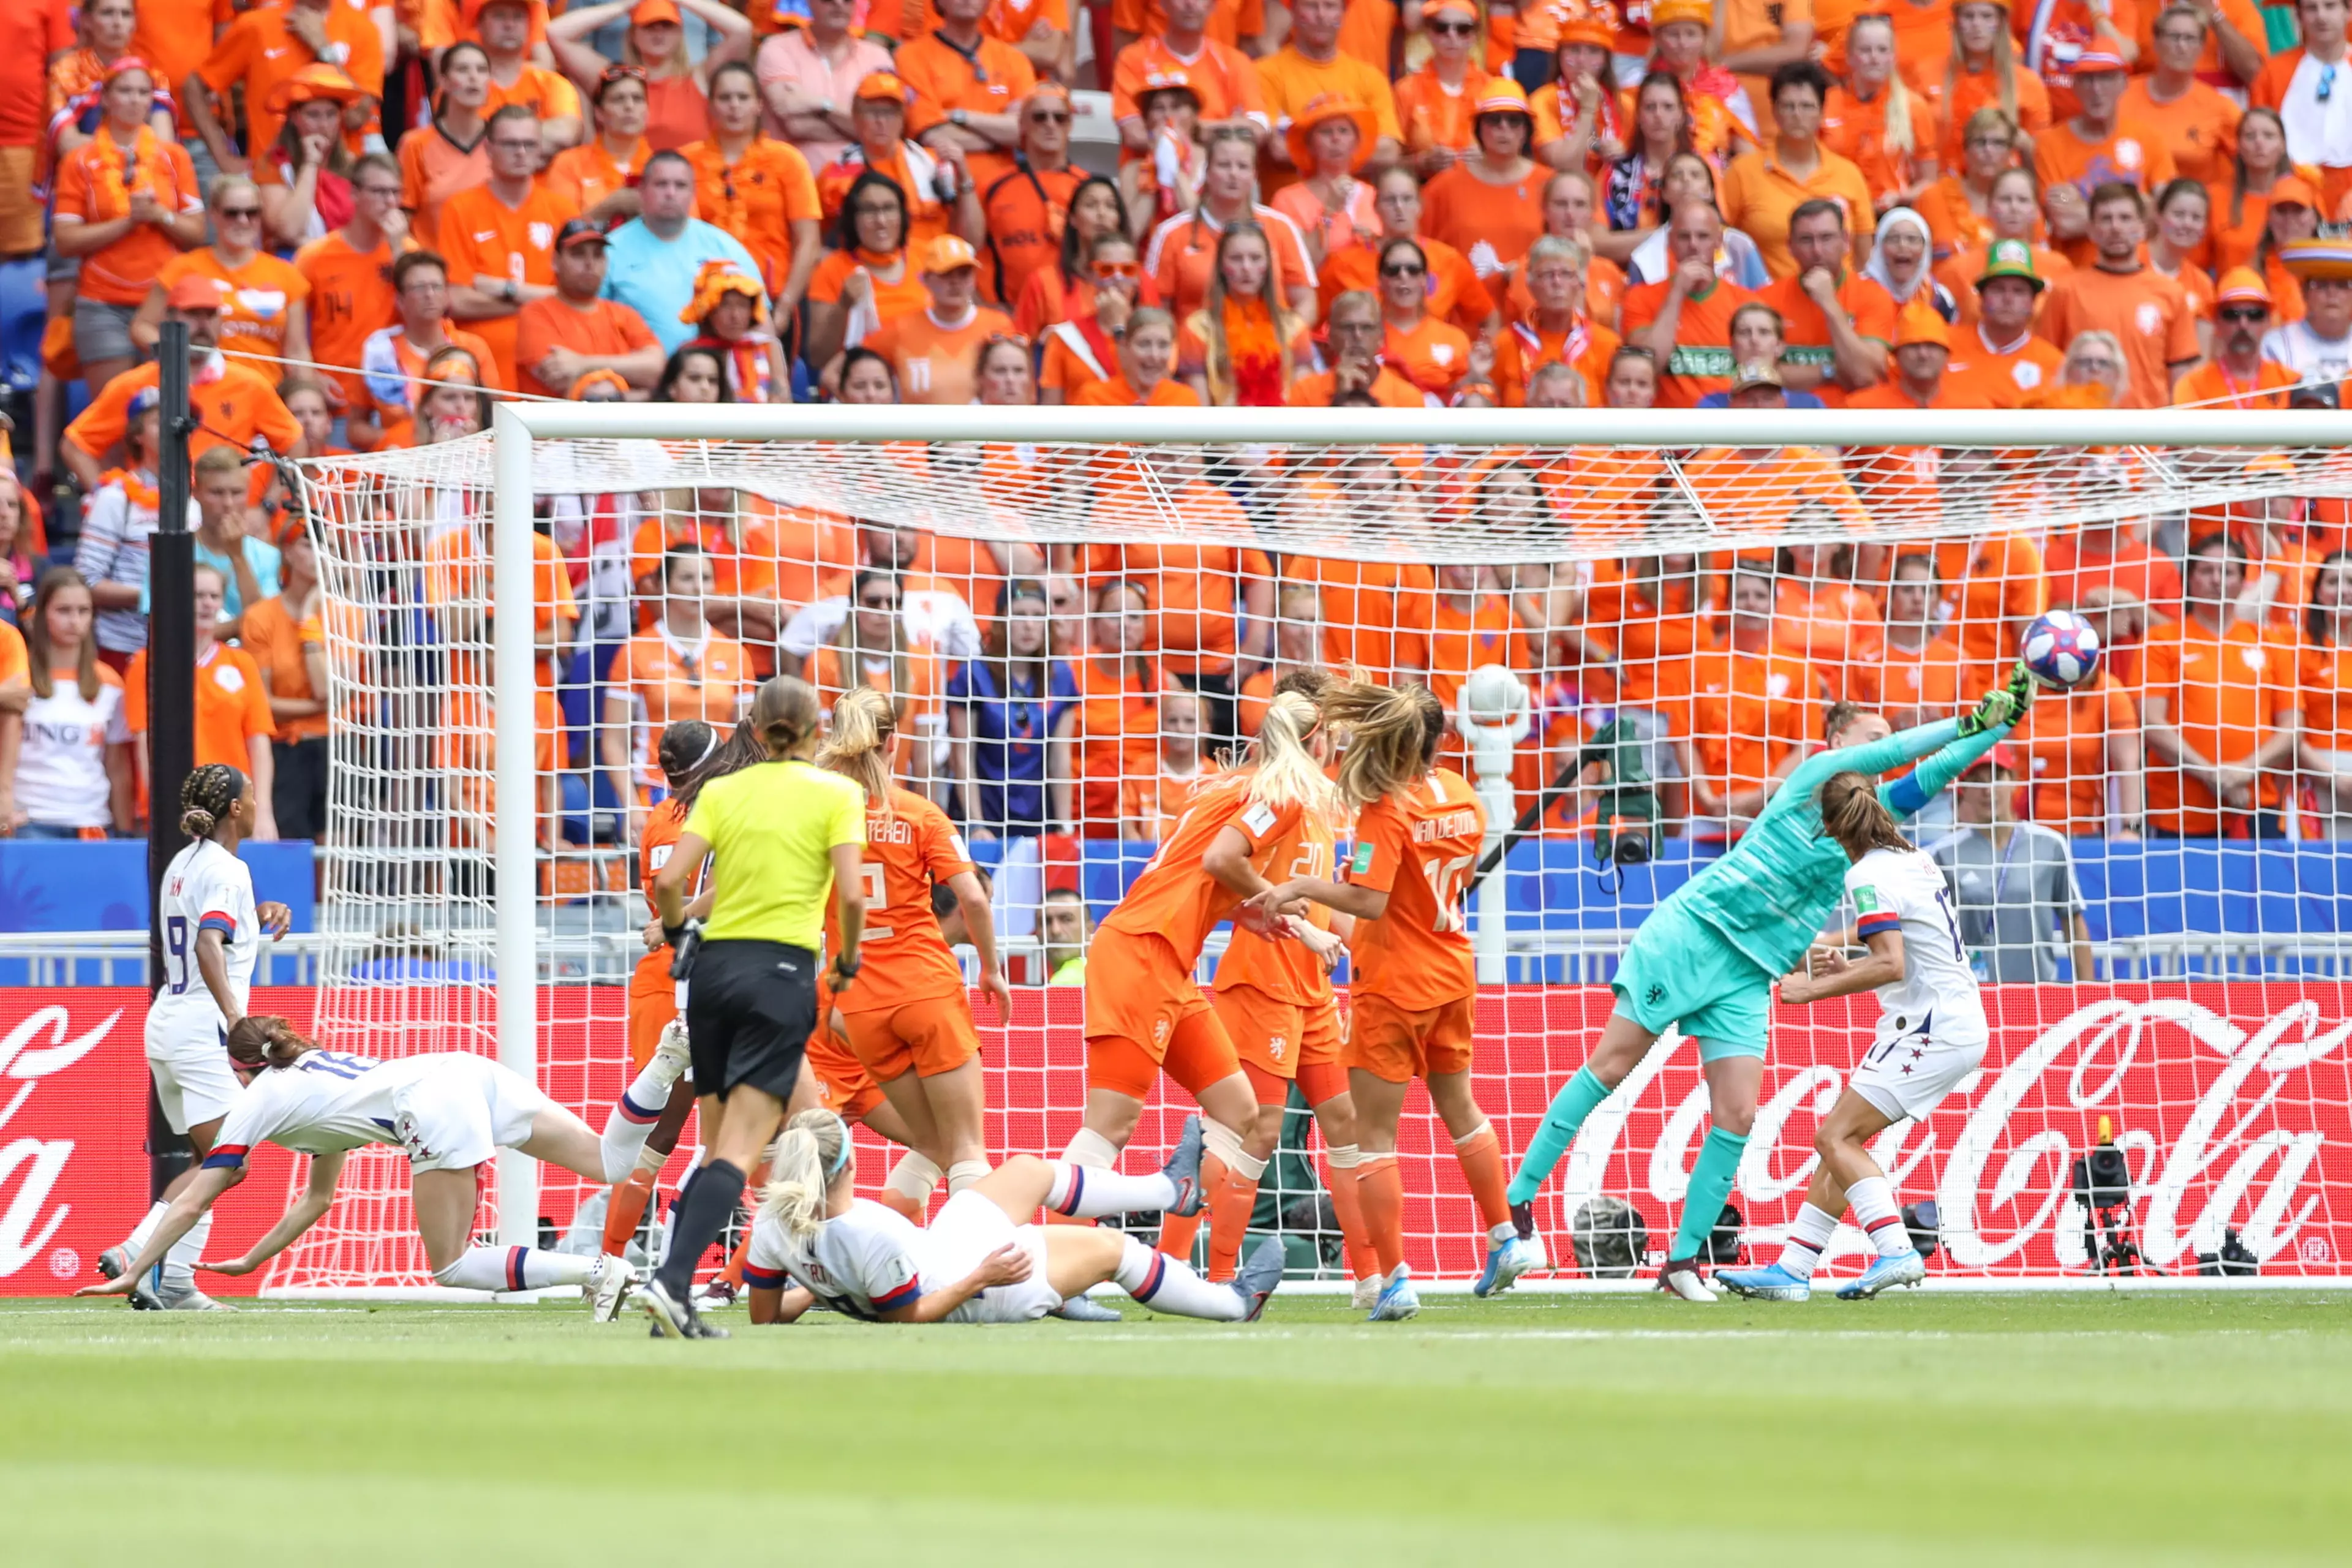 The Women's World Cup was played to a backdrop of people calling for smaller goals